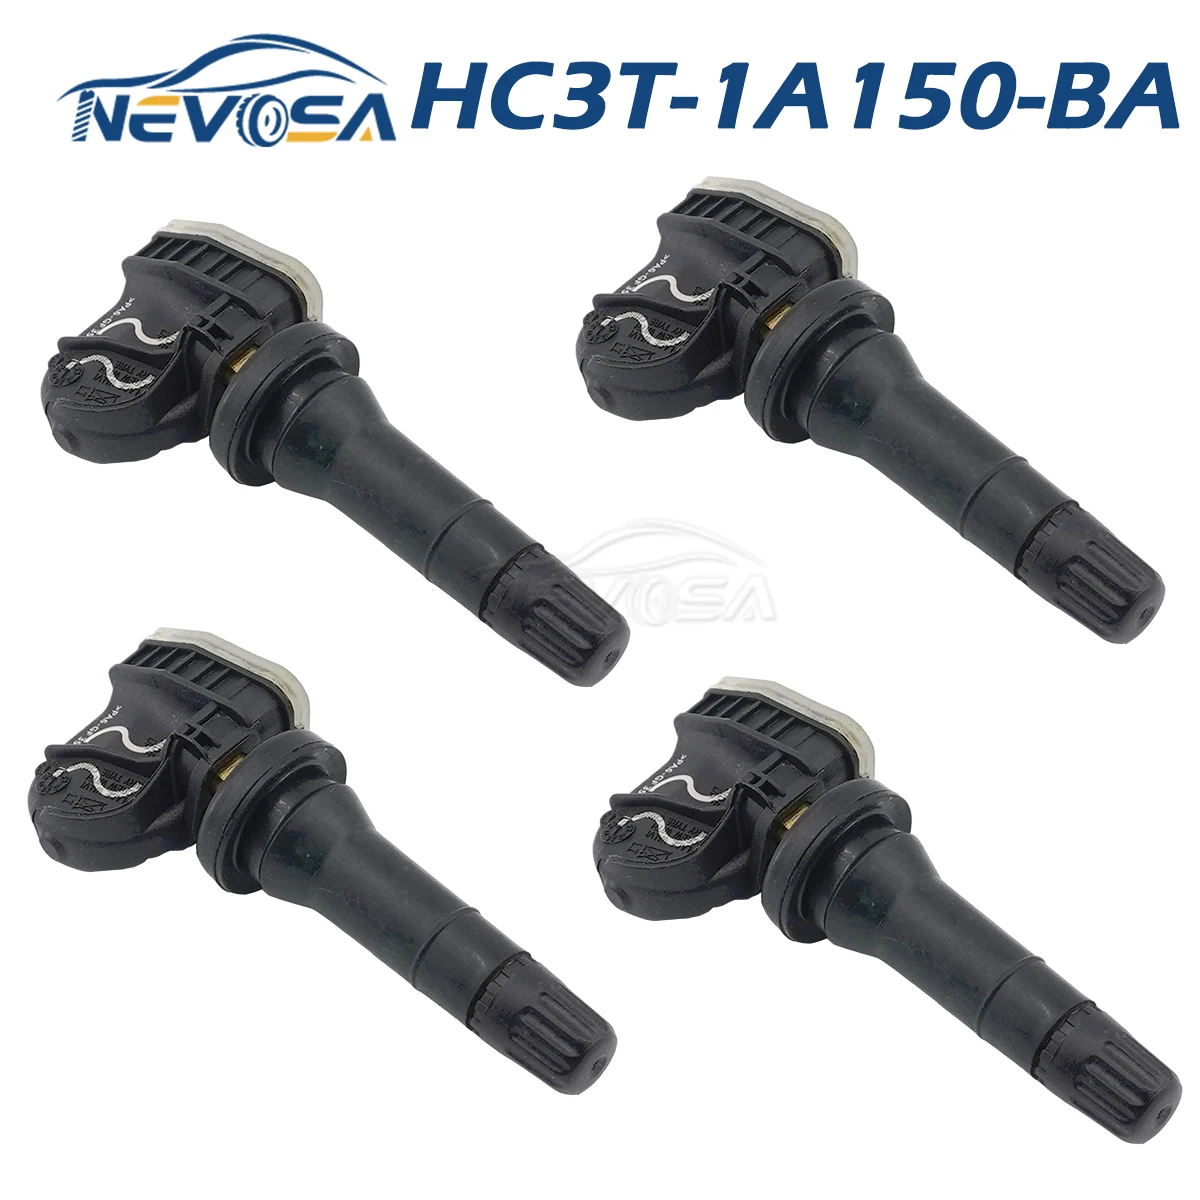 

Nevosa TPMS Sensor For Ford F-Series E-Series Expedition Ranger Fusion Lincoln MKX MKZ Nautilus HC3T-1A180-AB HC3T-1A150-BA